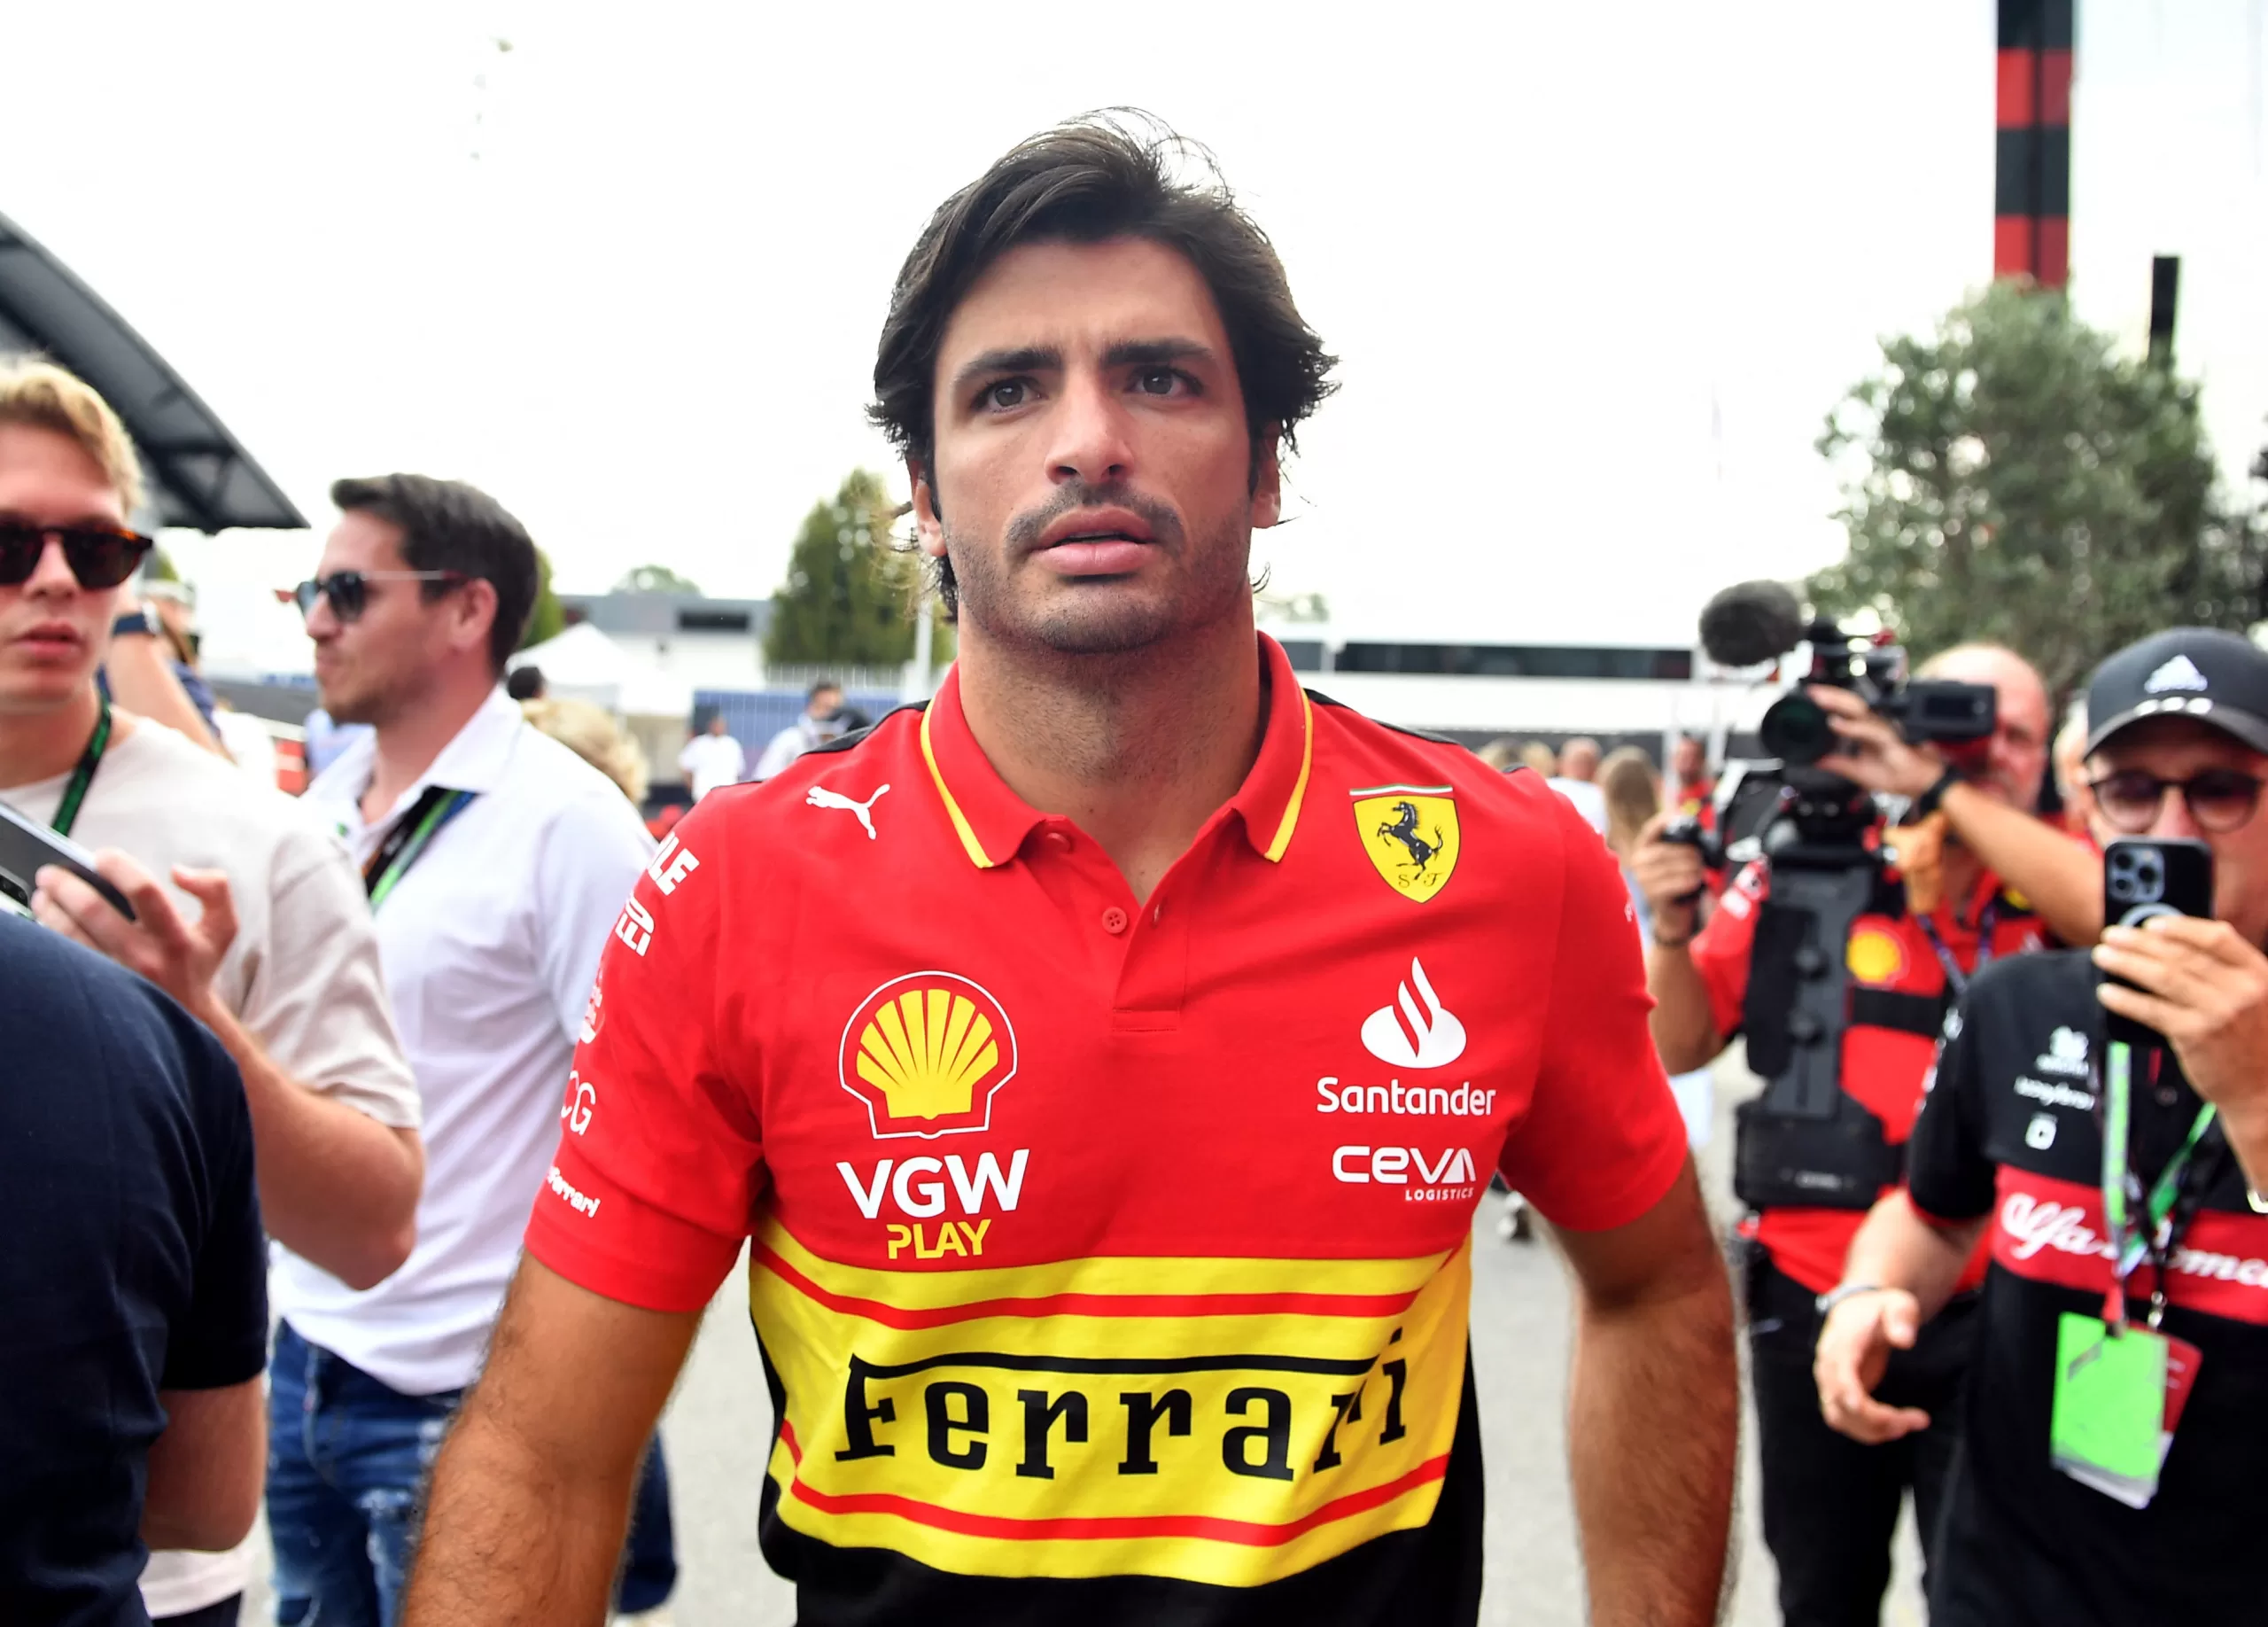 You are currently viewing Carlos Sainz is robbed in Milan: his watch is stolen and he stops the thieves